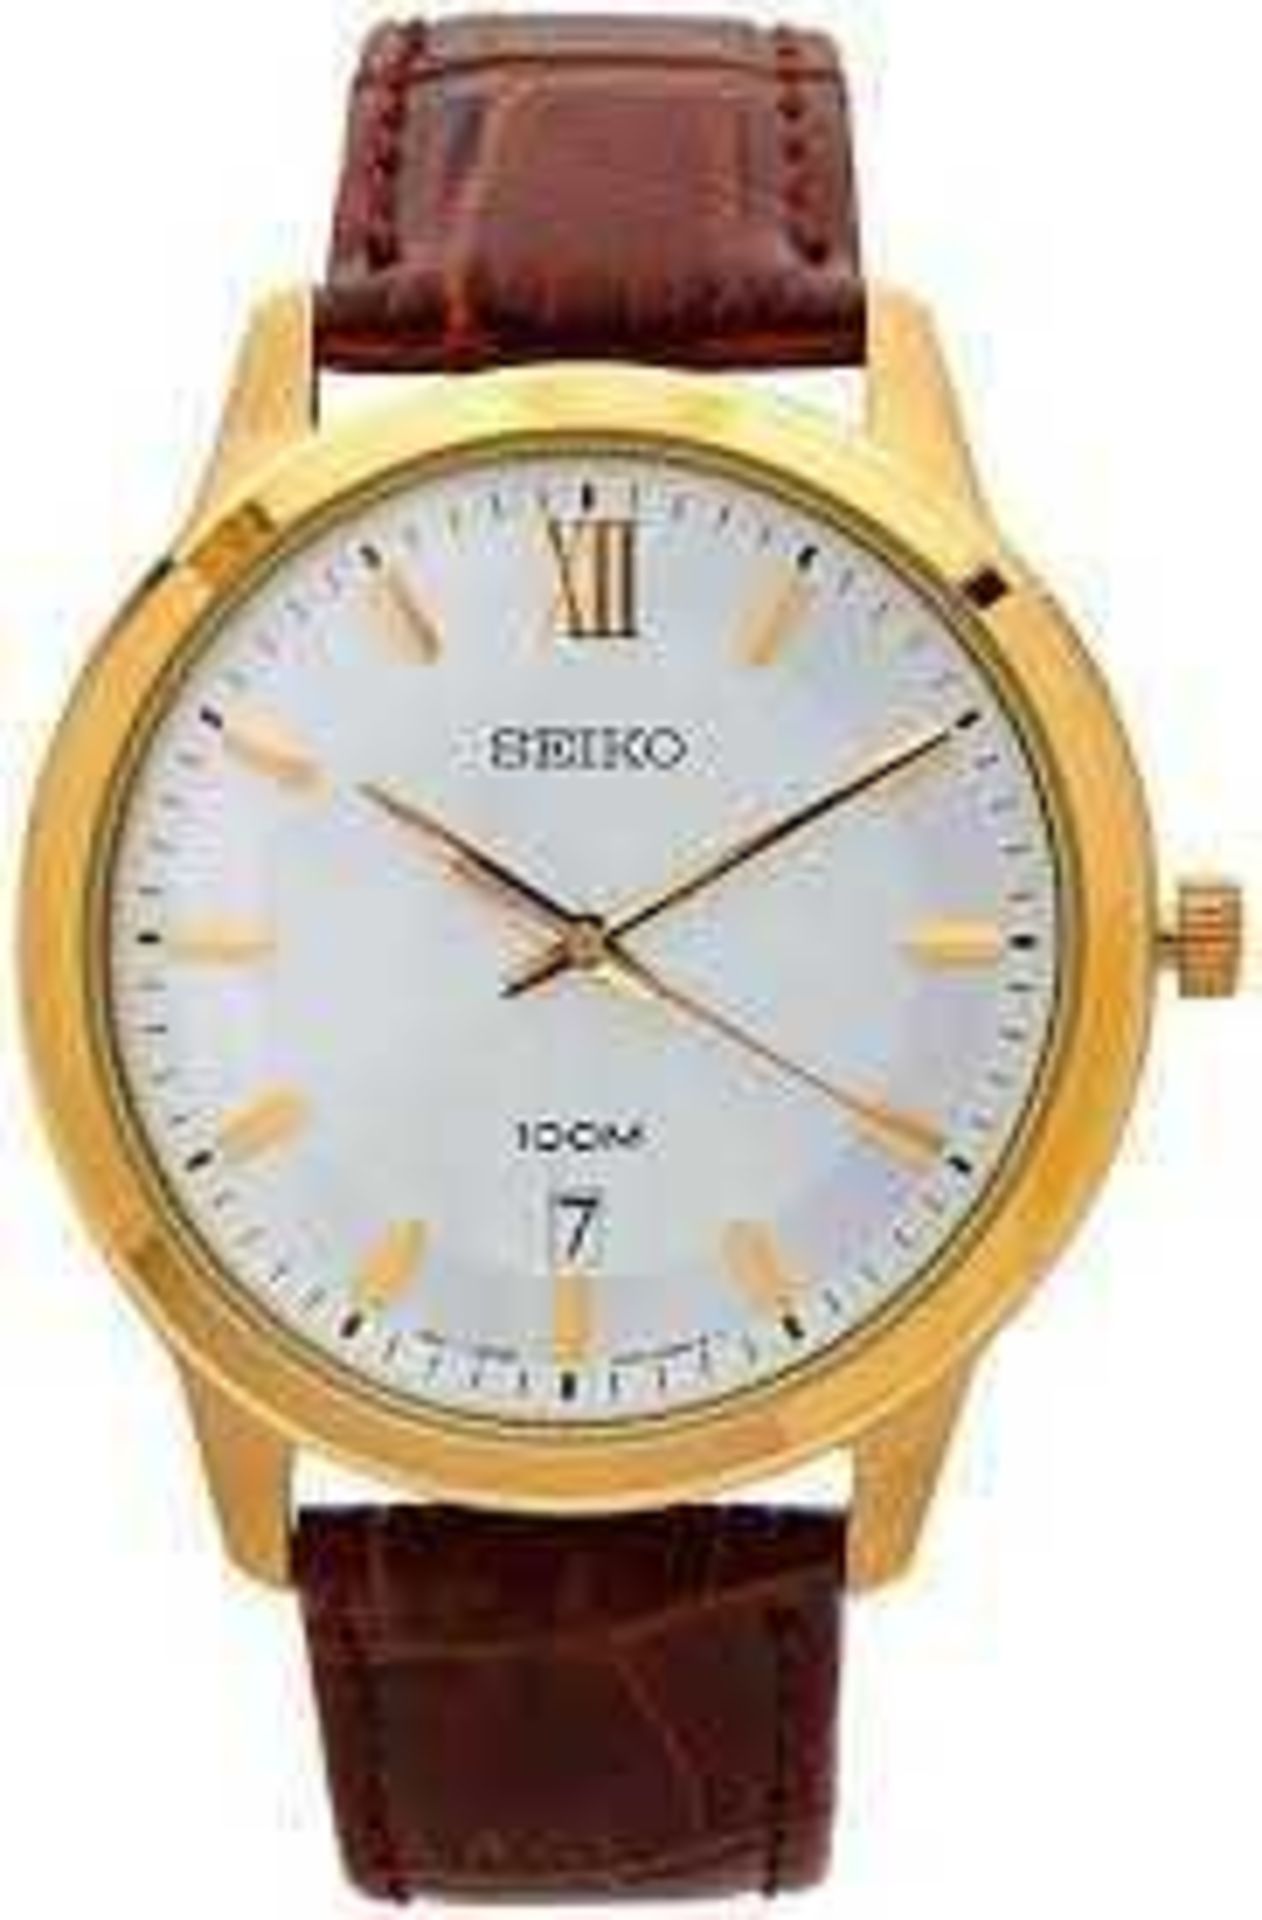 *RRP £400 Boxed Seiko Brown Leather Strap Gents Designer Wristwatch 45.107 (Appraisals Available